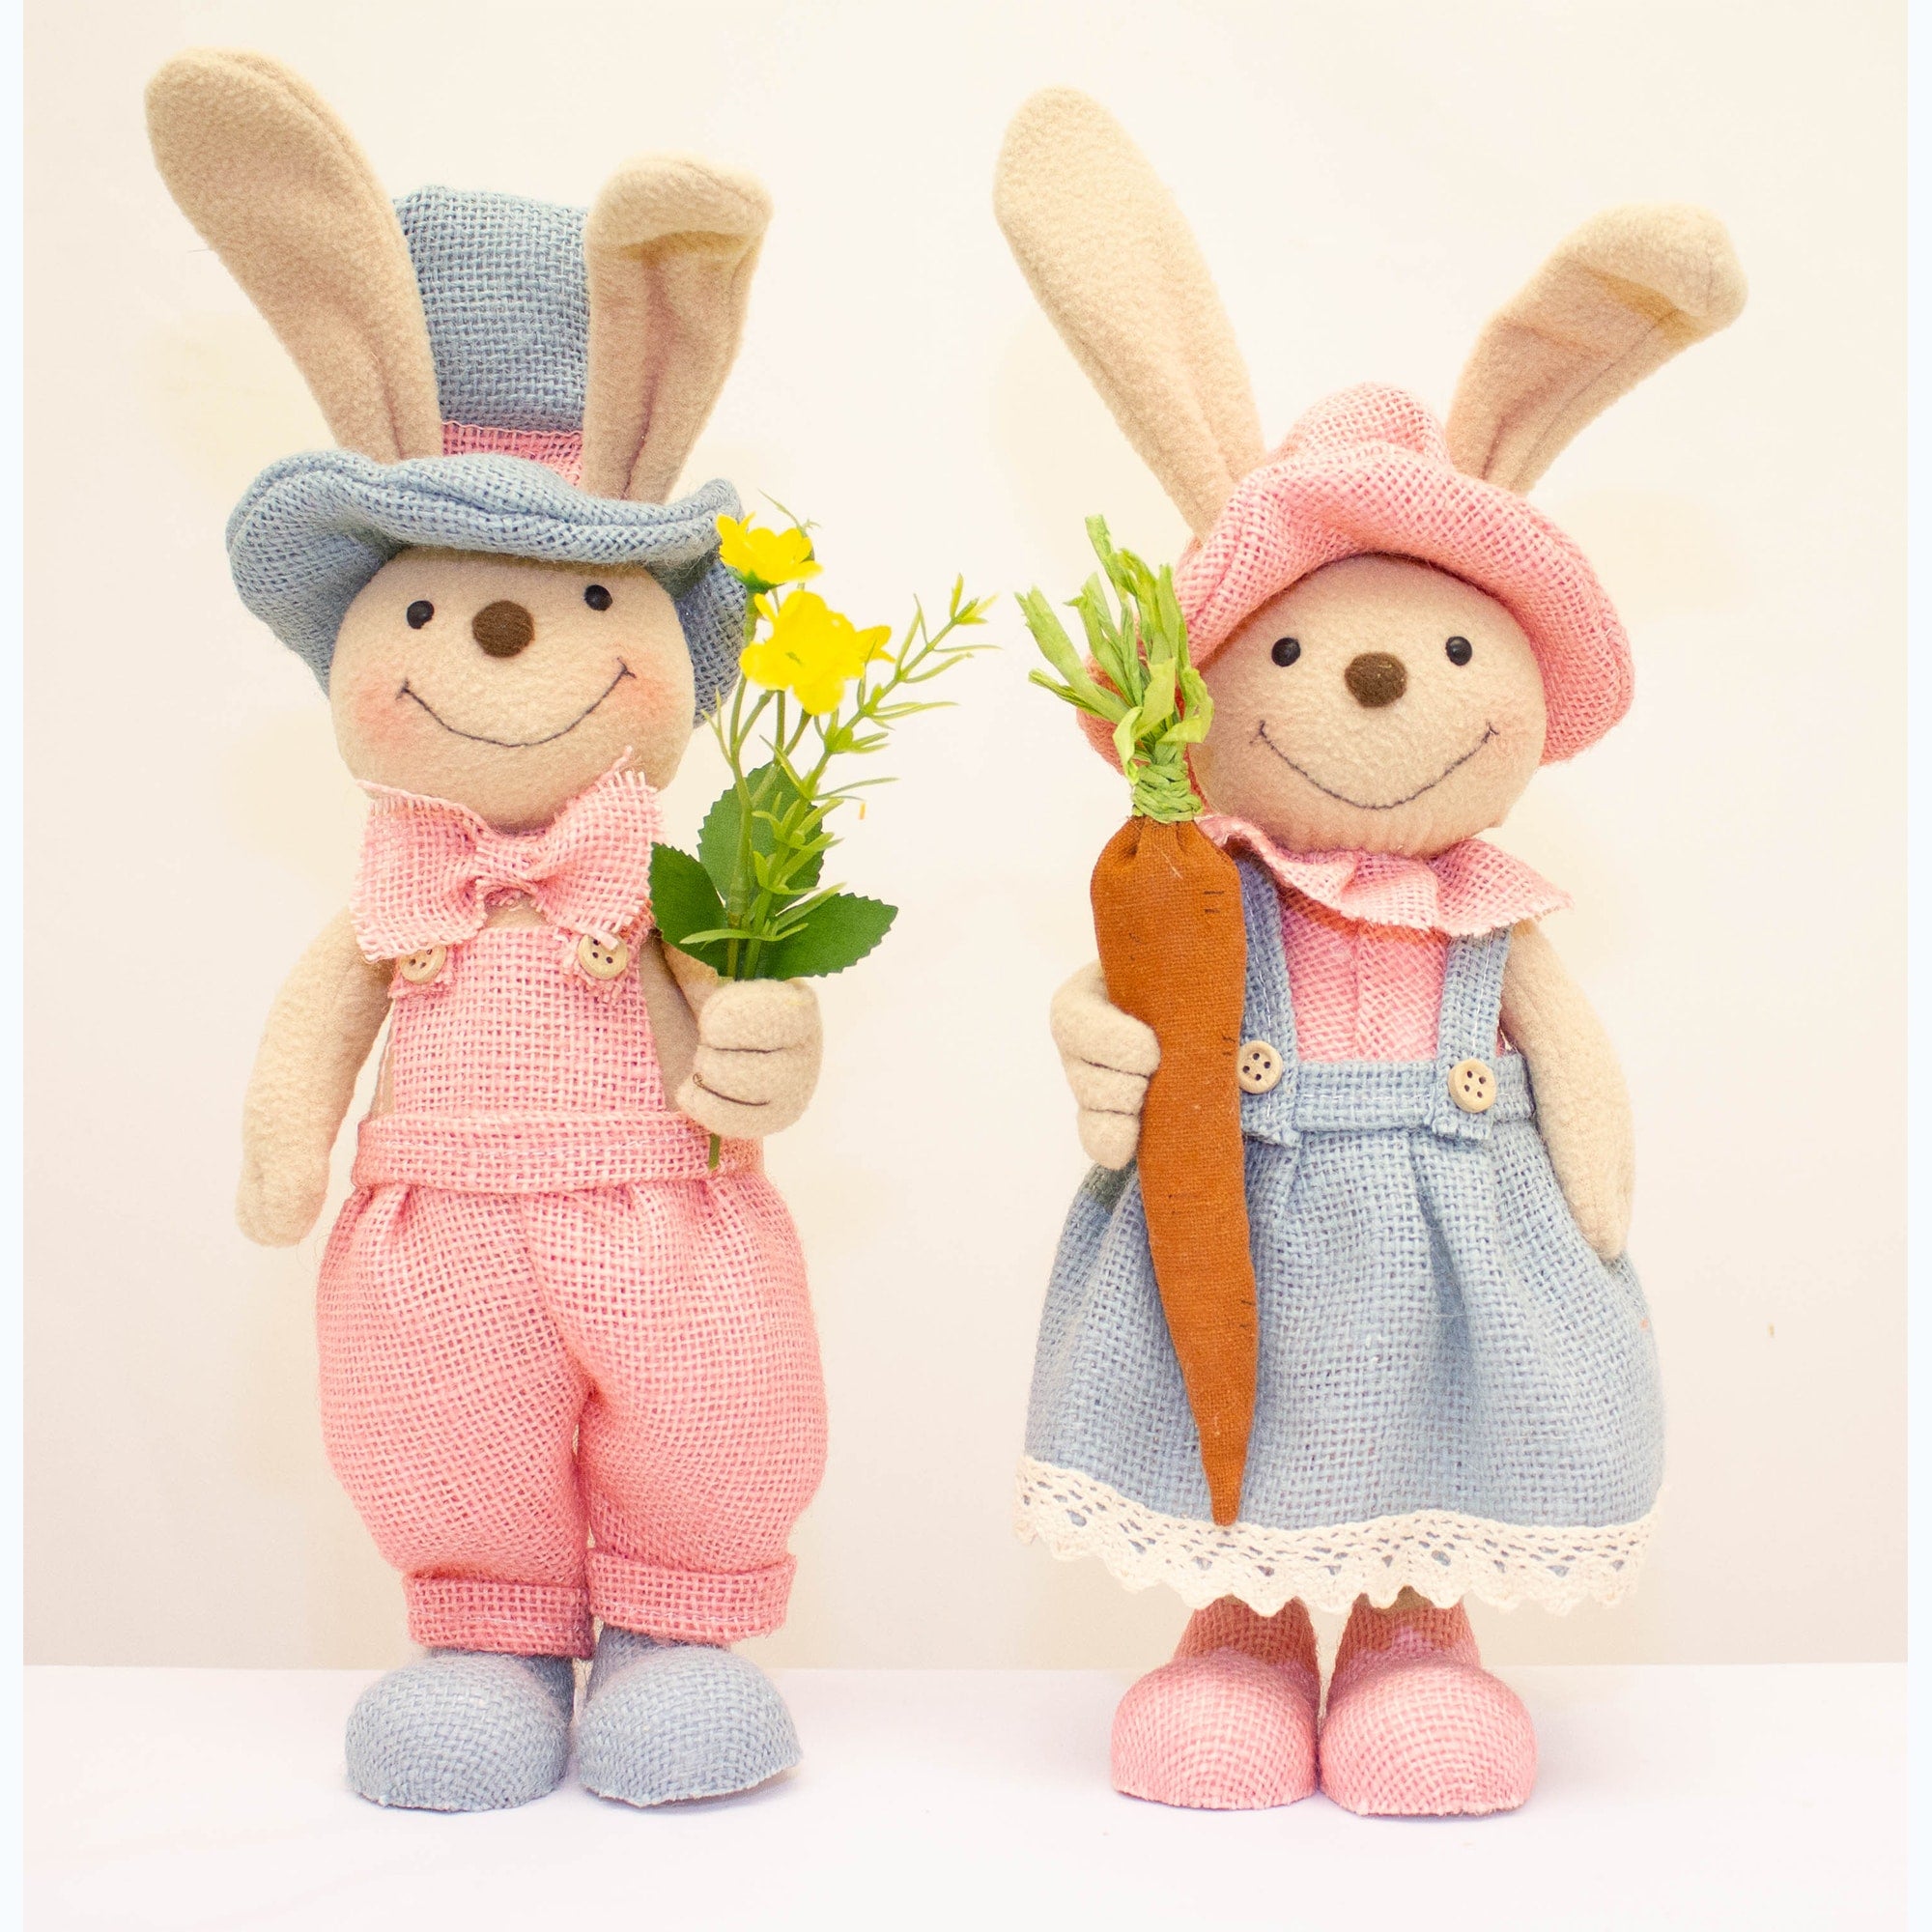 Whimsey bunny characters